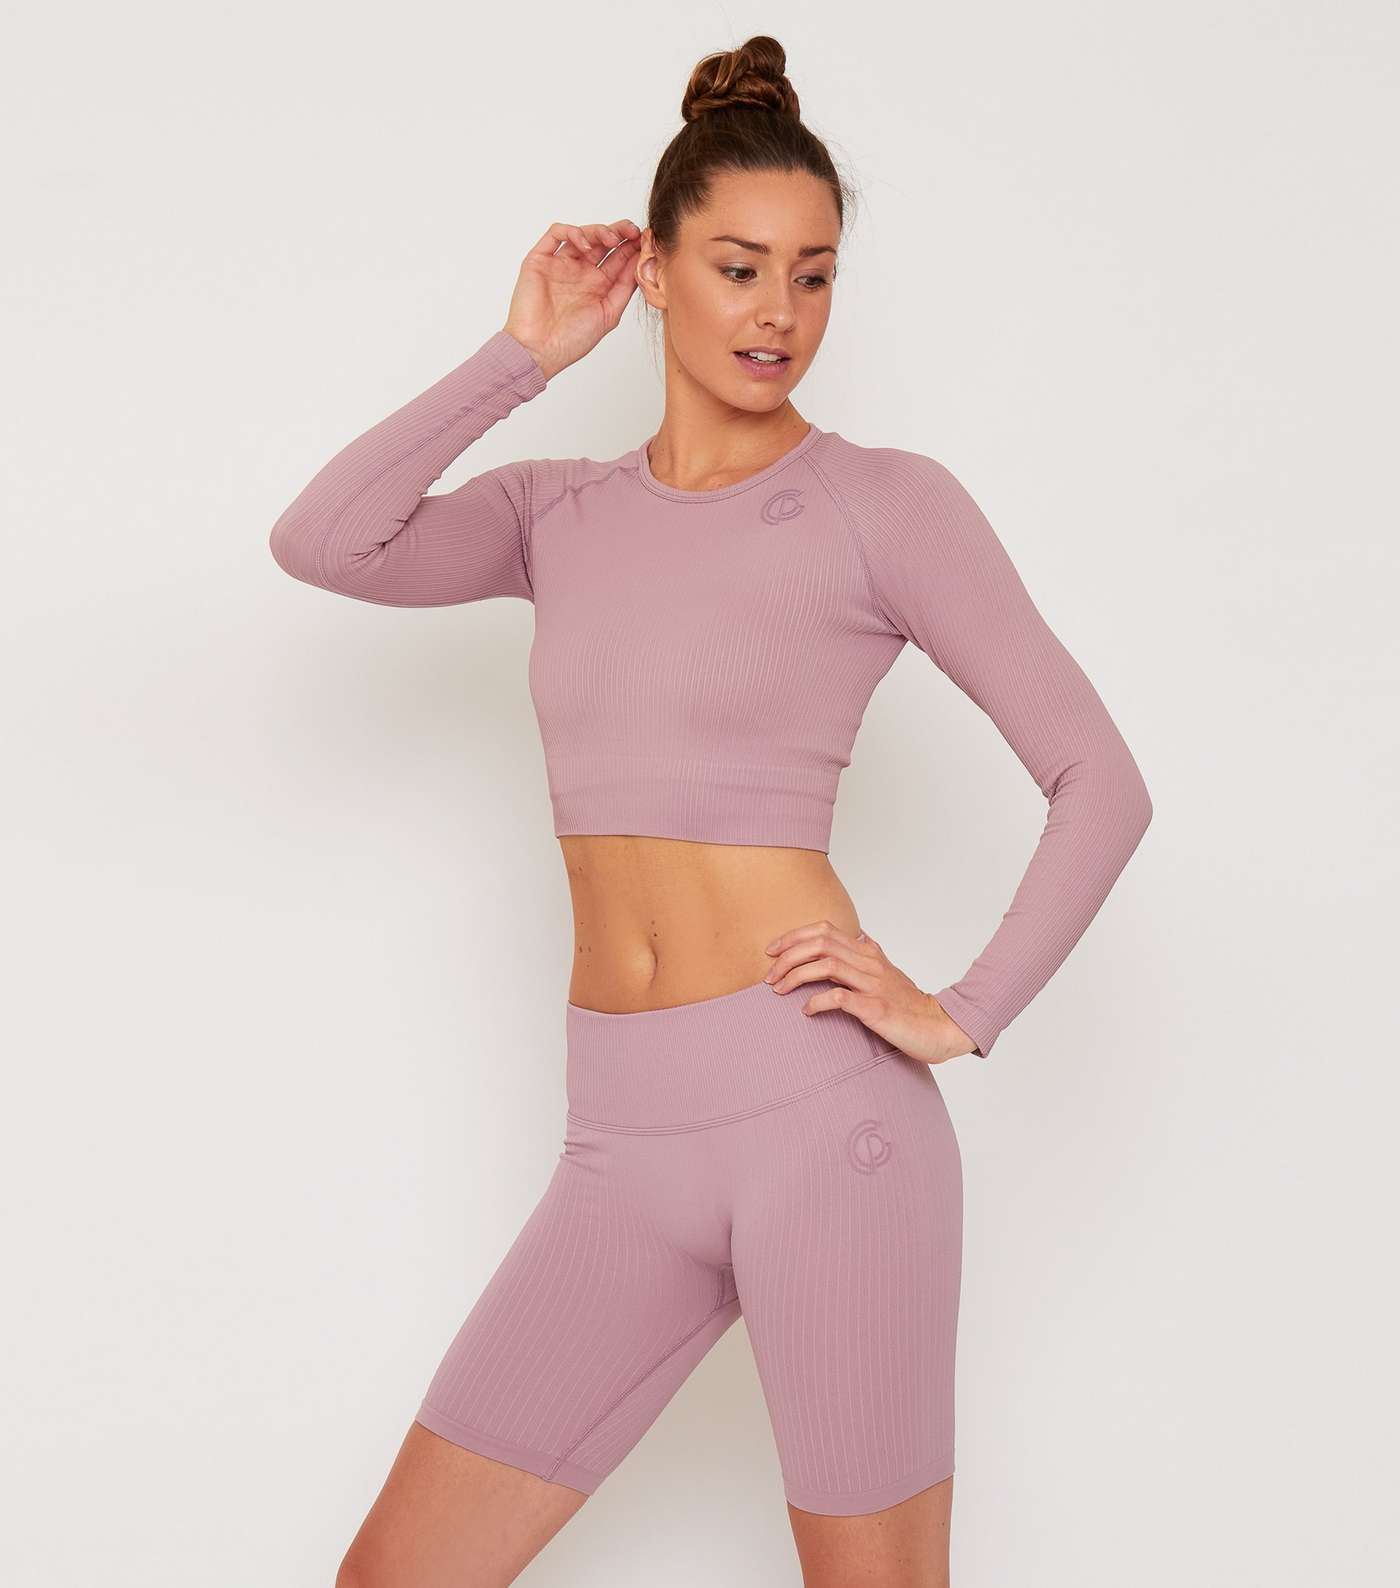 GymPro Pale Pink Ribbed Long Sleeve Sports Crop Top